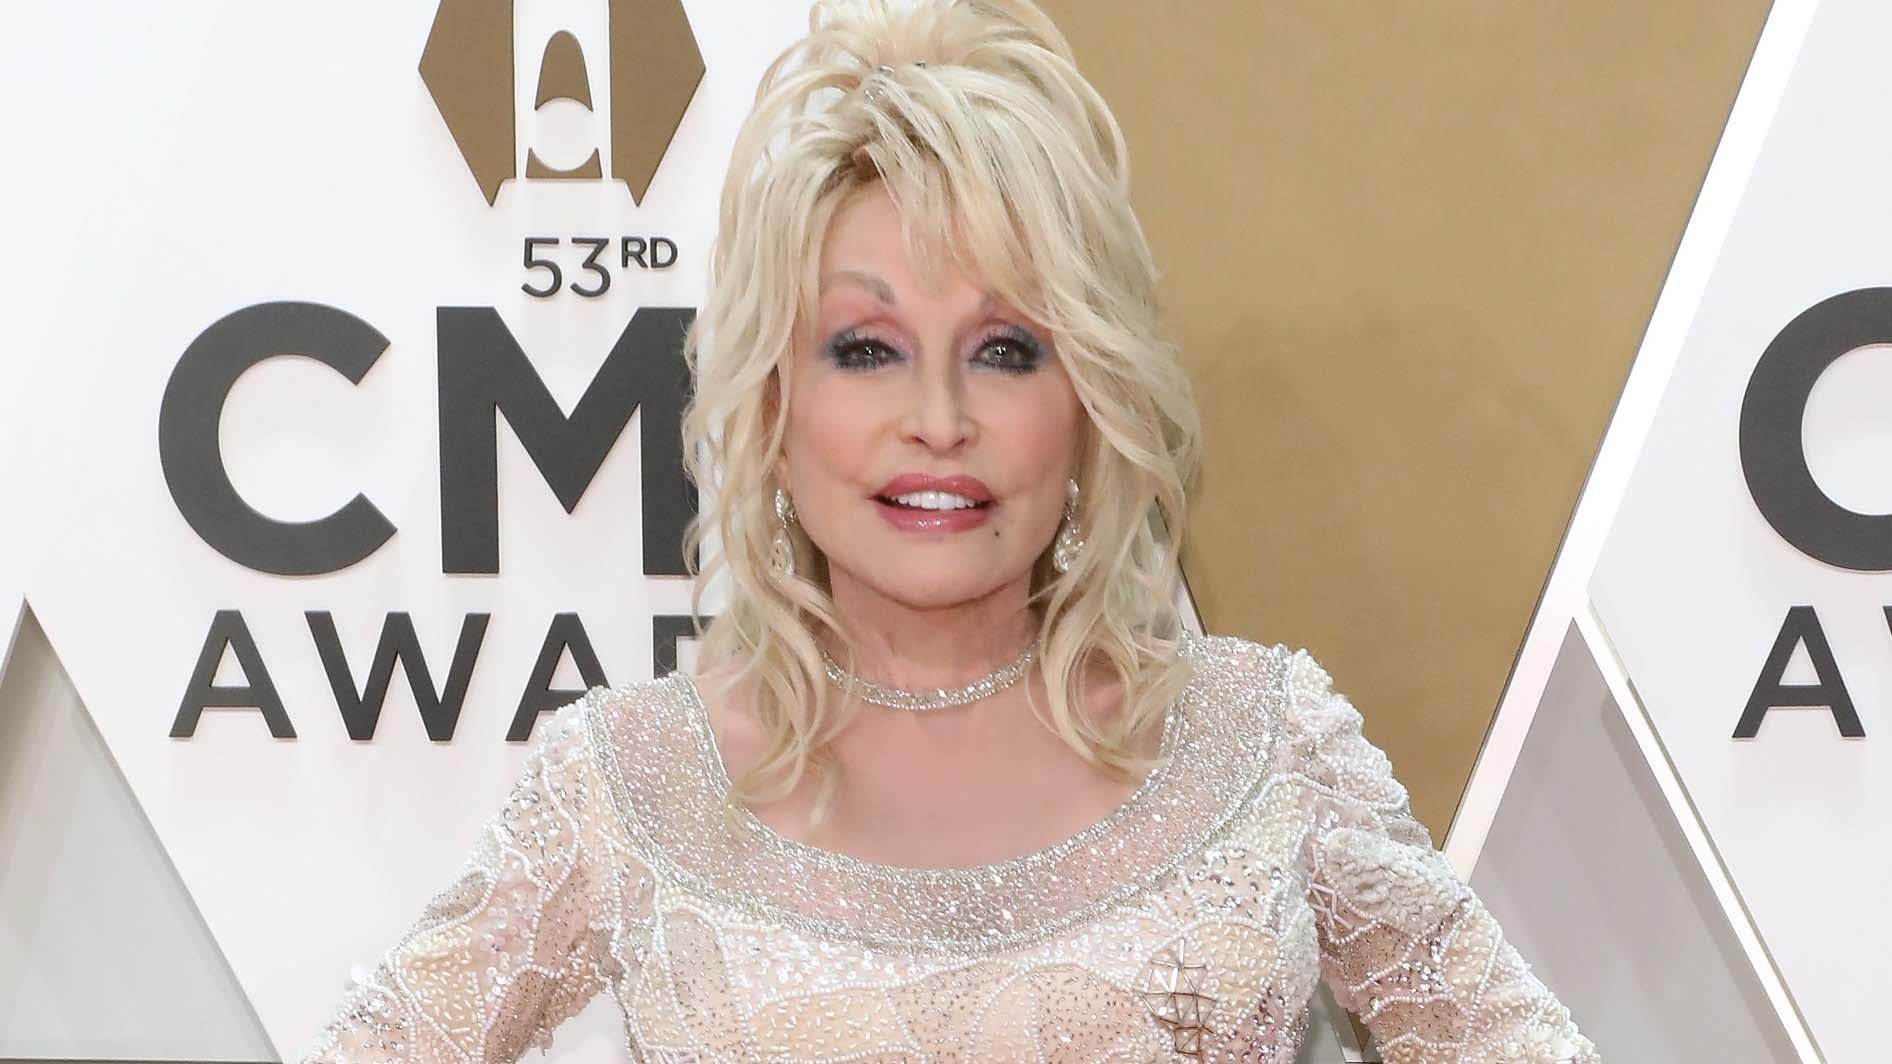 Dolly Parton reveals secrets to long-lasting marriage: ‘We have a lot of fun’